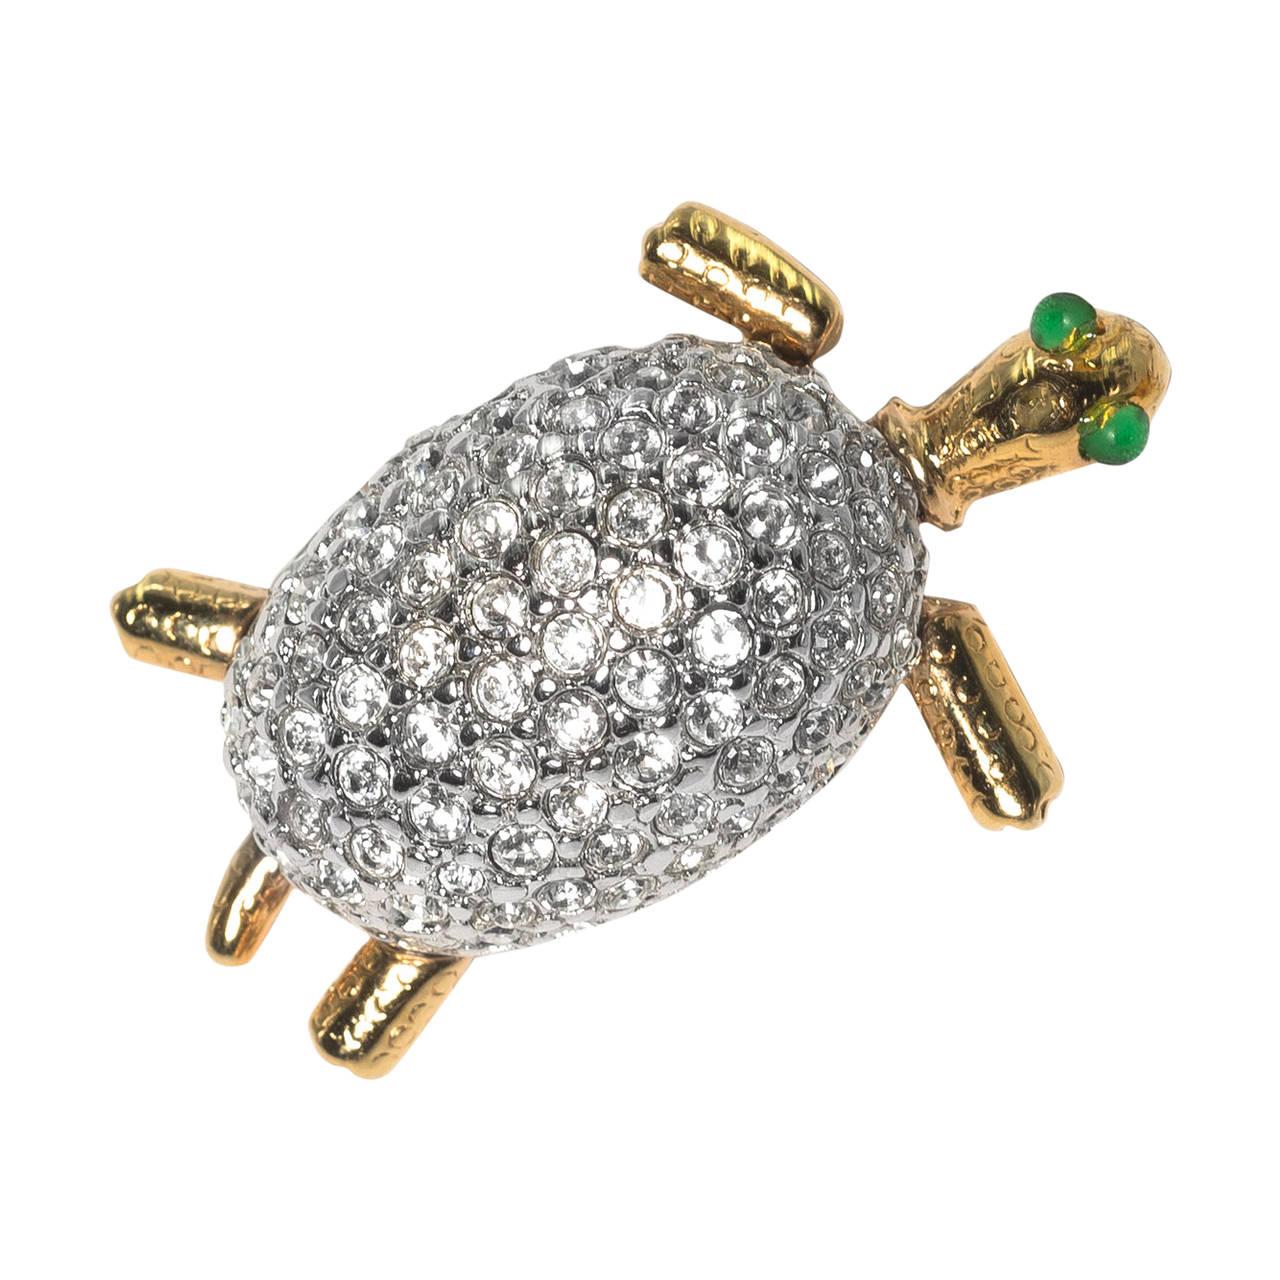 Charming Pave Turtle Scatter Pin copied straight out of the best known Paris jeweler from the 1960s. One and a half inches long, this slow loving gem is available in more than one if you would like to wear a pair or even three. Just let us know how